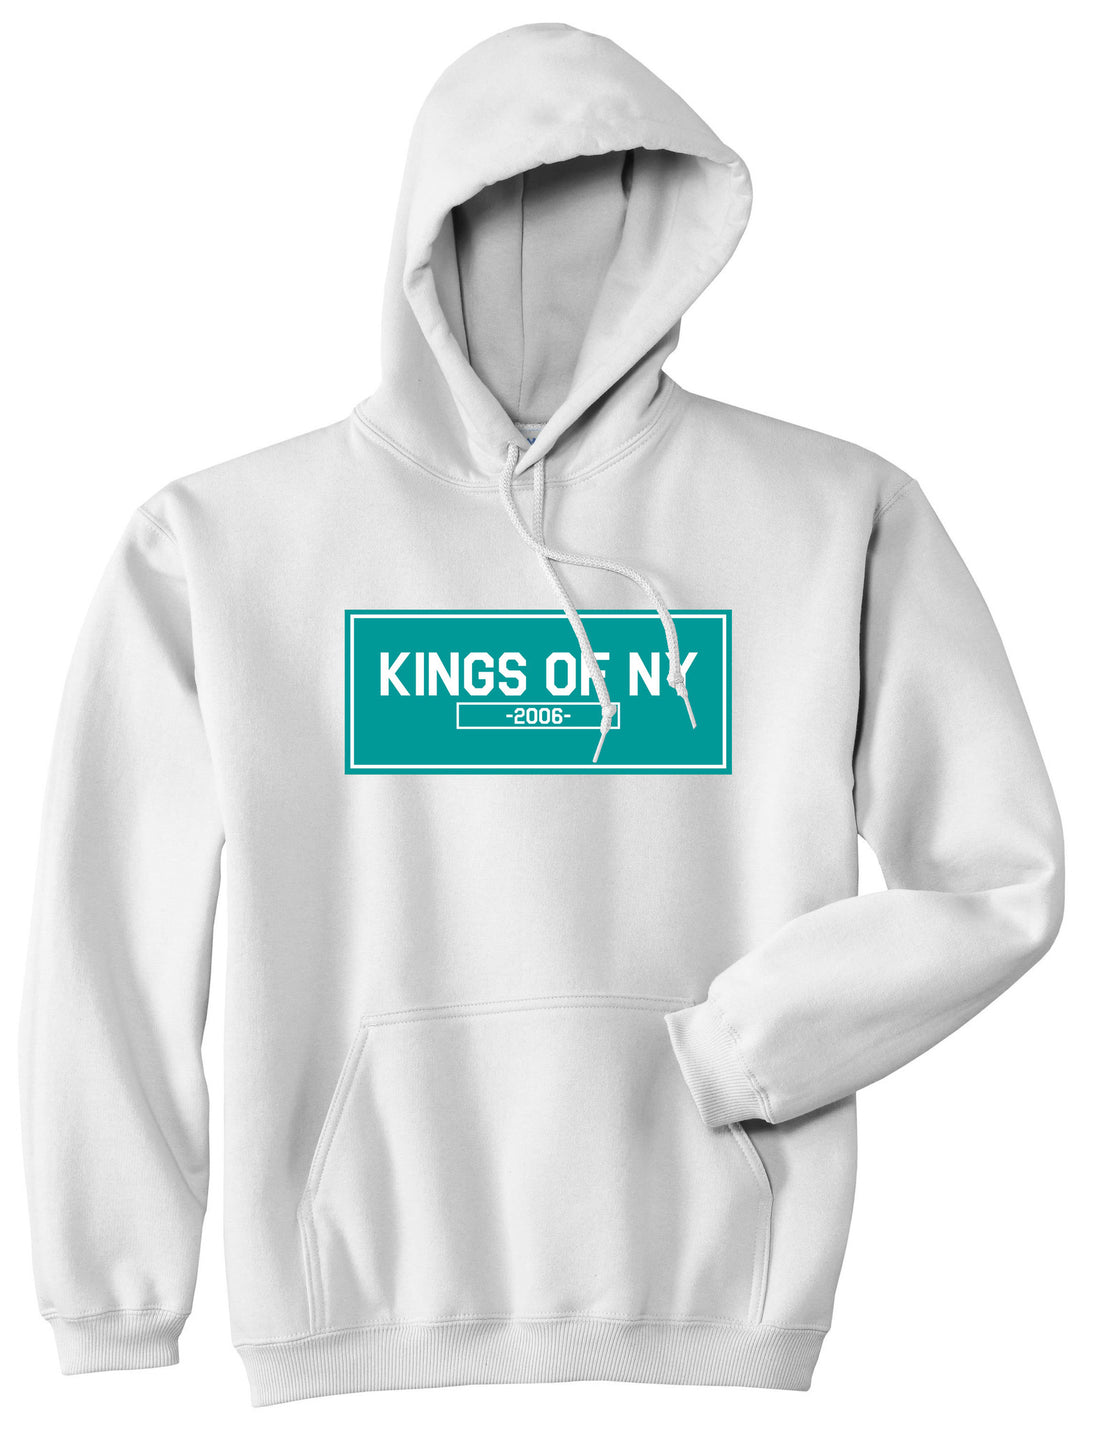 FALL15 Blue Logo Pullover Hoodie Hoody in White by Kings Of NY